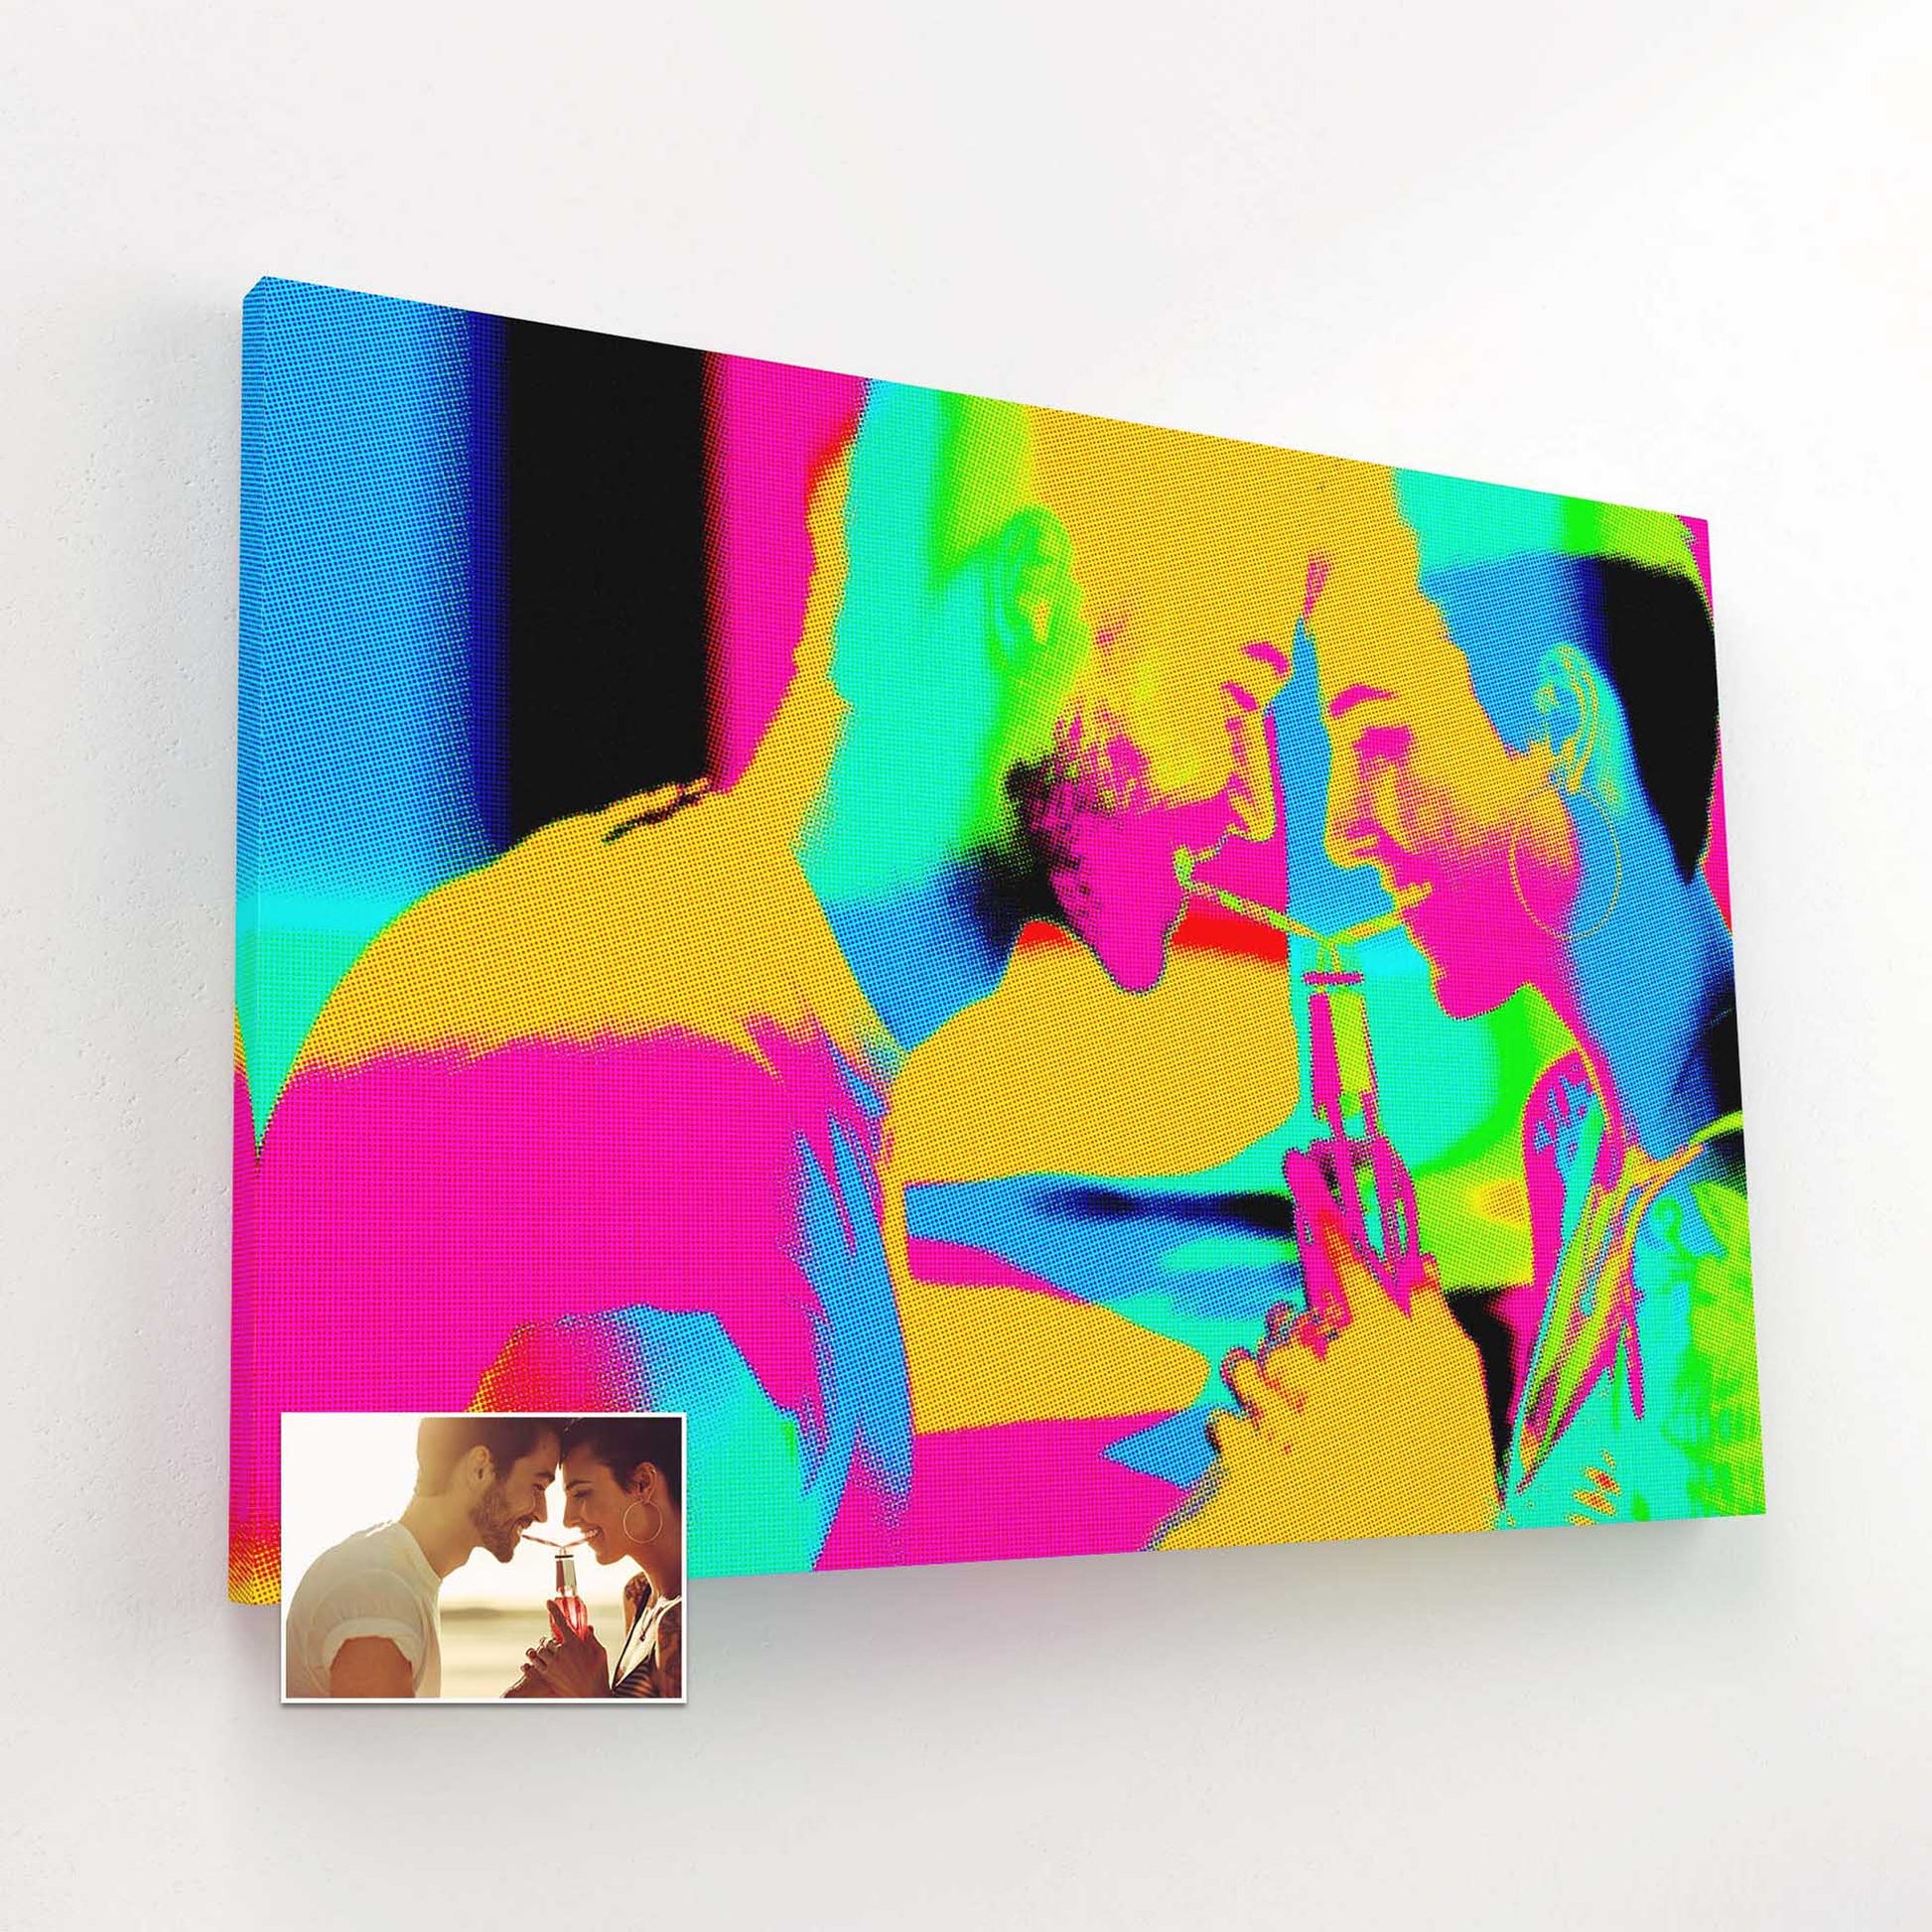 Transform your photo into a personalized Pop Art Canvas. The halftone texture adds depth and character to the handmade canvas, creating a cool and urban piece of art. With trendy and vibrant full-color digital art